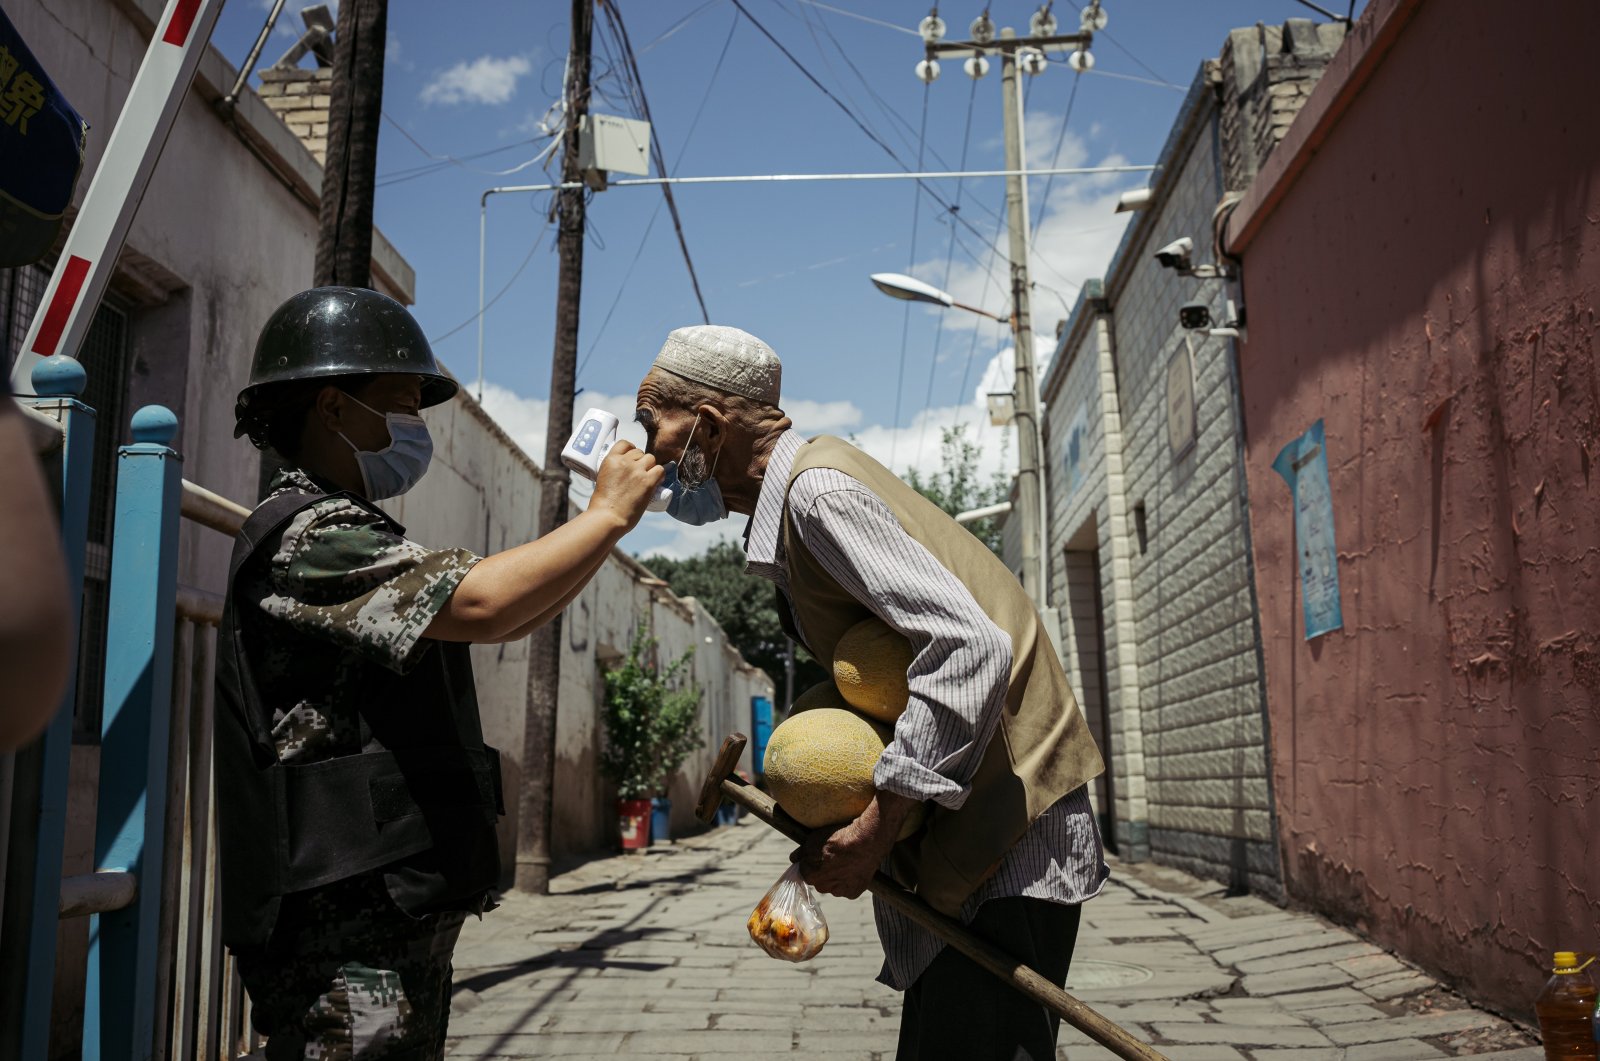 An elderly Uighur man is tested at a temperature checkpoint, Kuqa, Xinjiang Uighur Autonomous Region, China, June 29, 2020. (Photo by Getty Images)